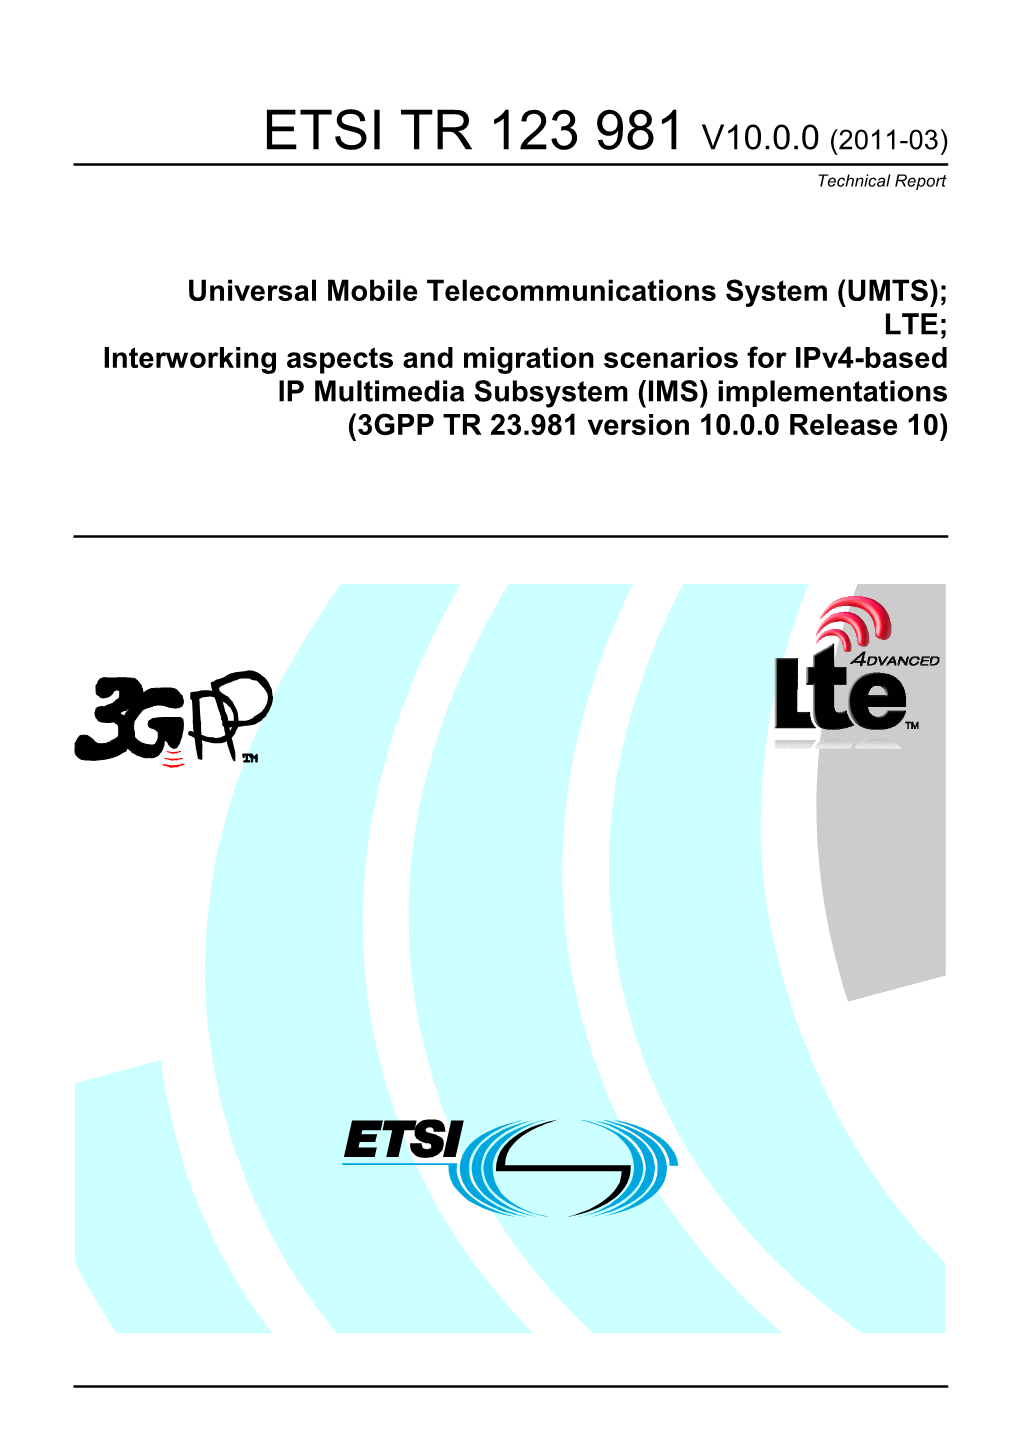 LTE; Interworking Aspects and Migration Scenarios for Ipv4-Based IP Multimedia Subsystem (IMS) Implementations (3GPP TR 23.981 Version 10.0.0 Release 10)